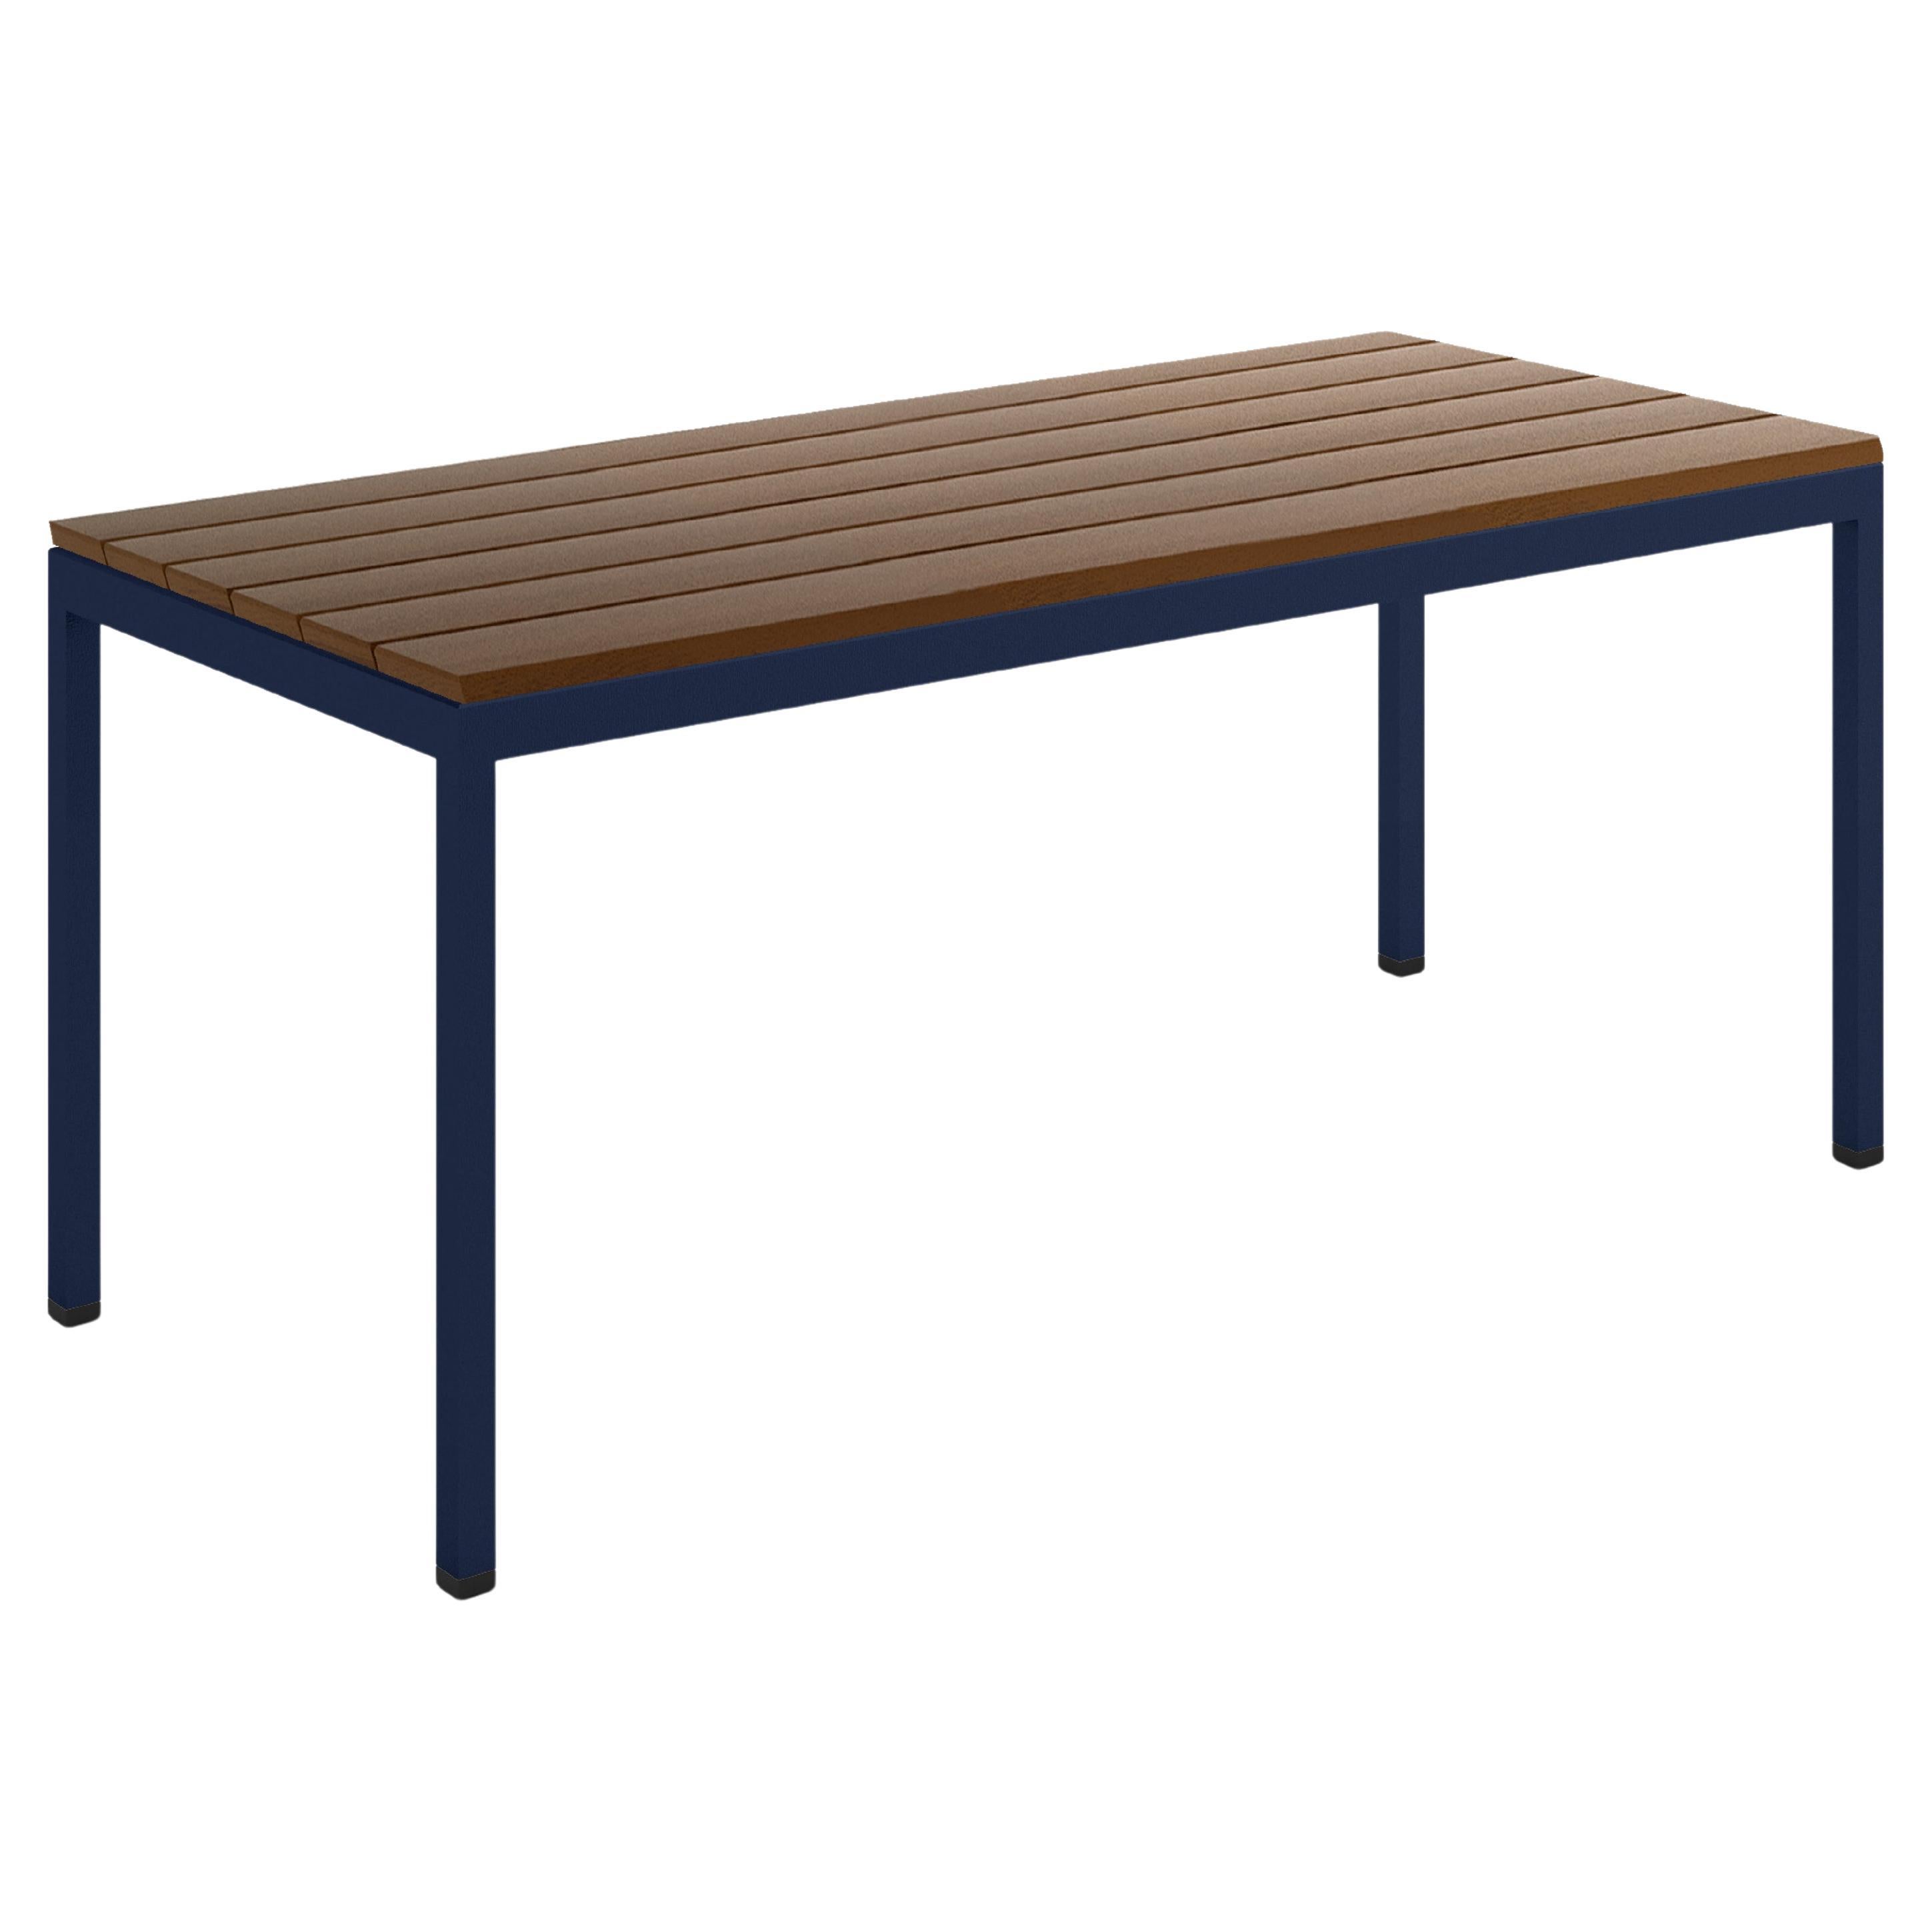 BICAtable Square Modern Outdoor Steel Table in Admiral with Ipê Wood 140x70cm